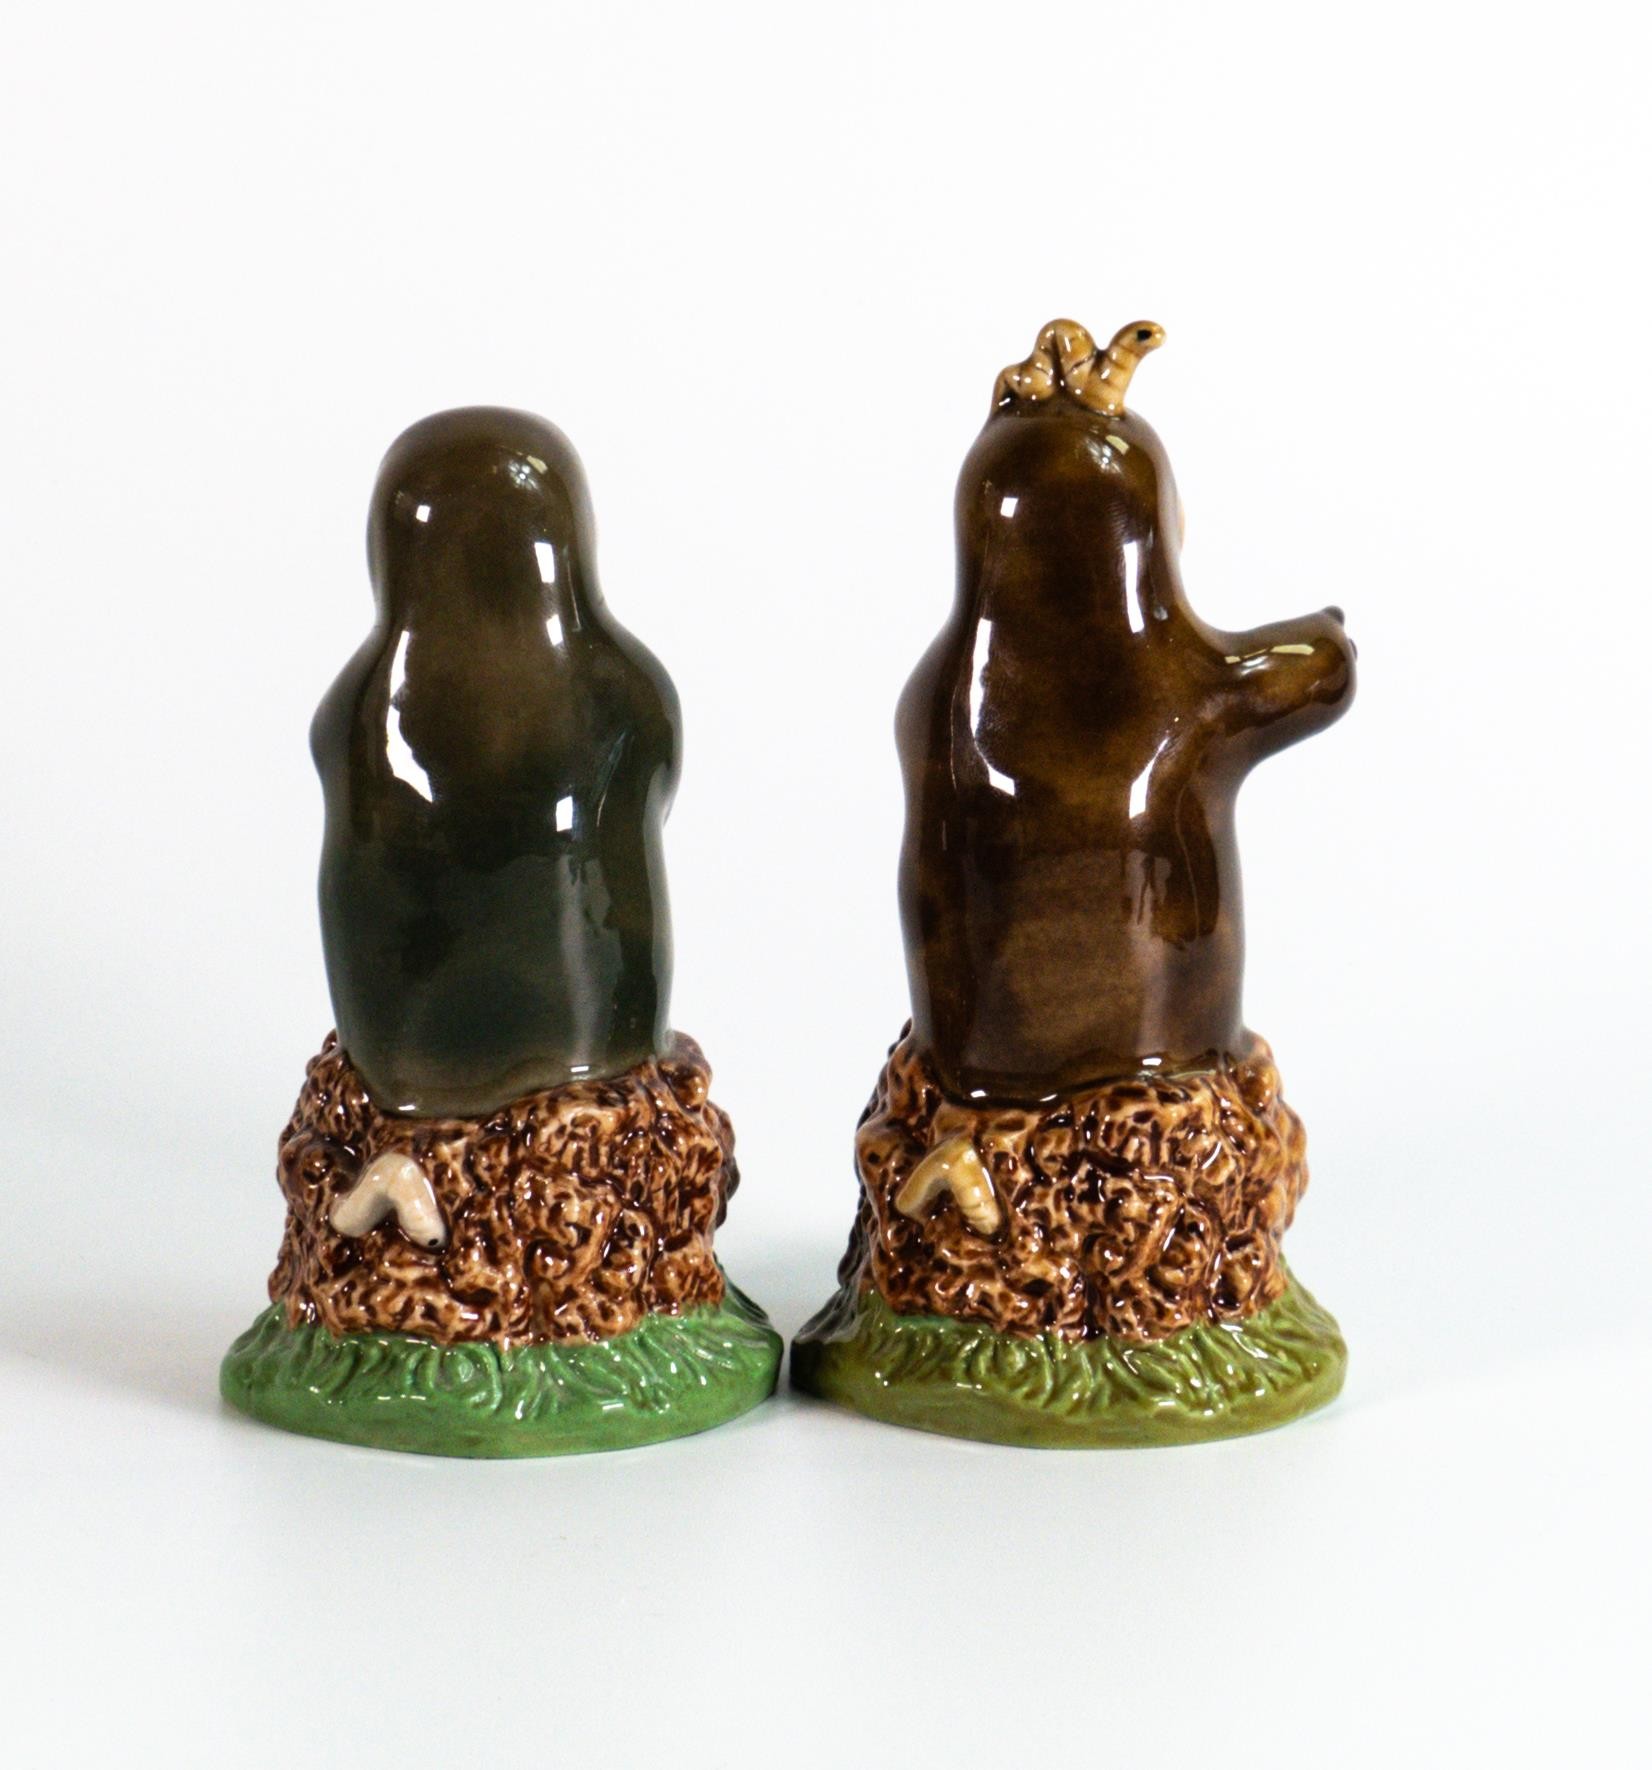 Wade In The Forest Deep series figures Morris Mole & similar - one prototype & one glaze sample, - Image 2 of 3